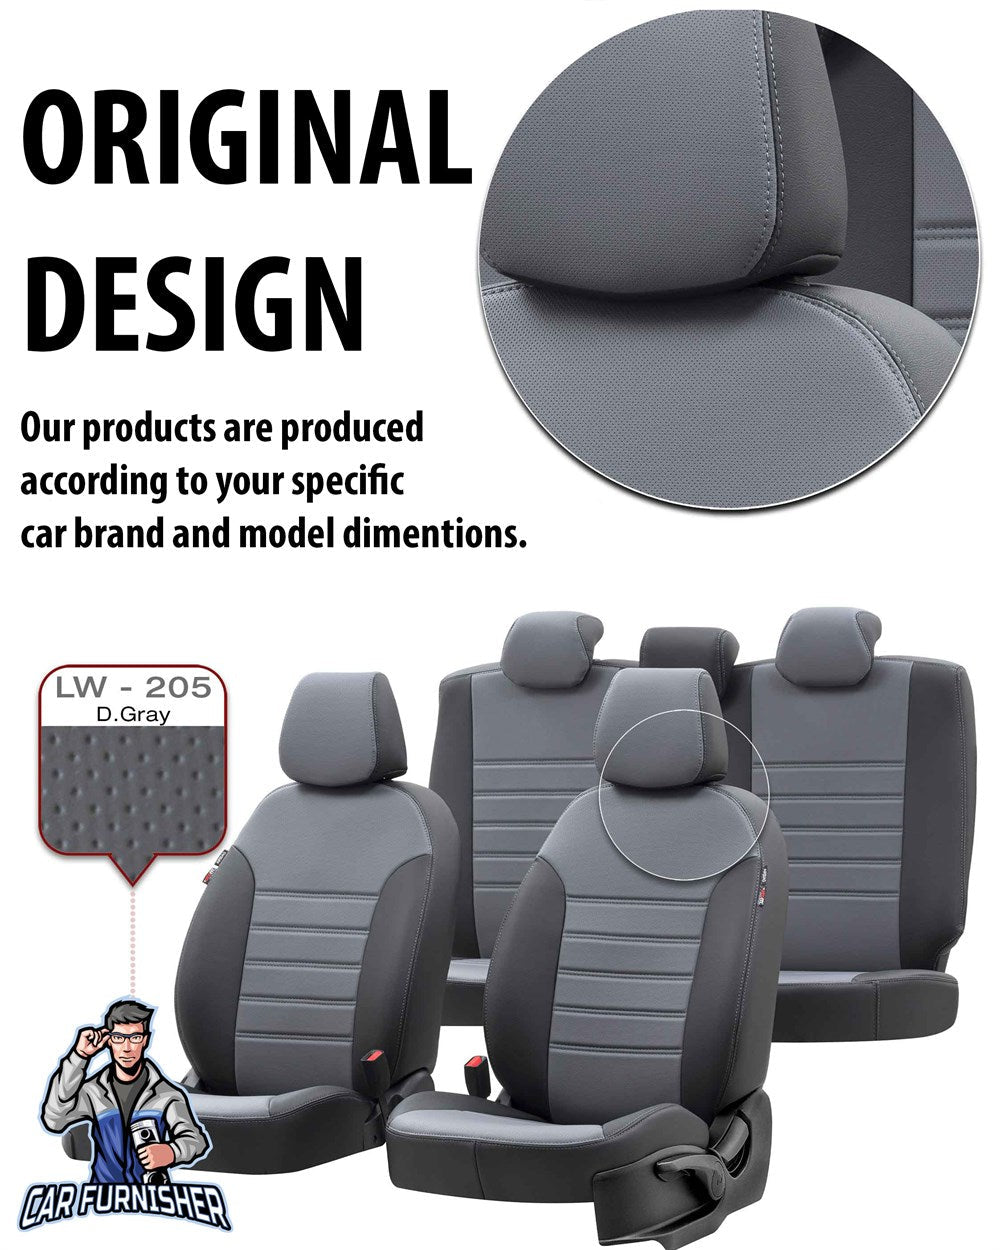 Volkswagen Passat Seat Cover Istanbul Leather Design Black Leather